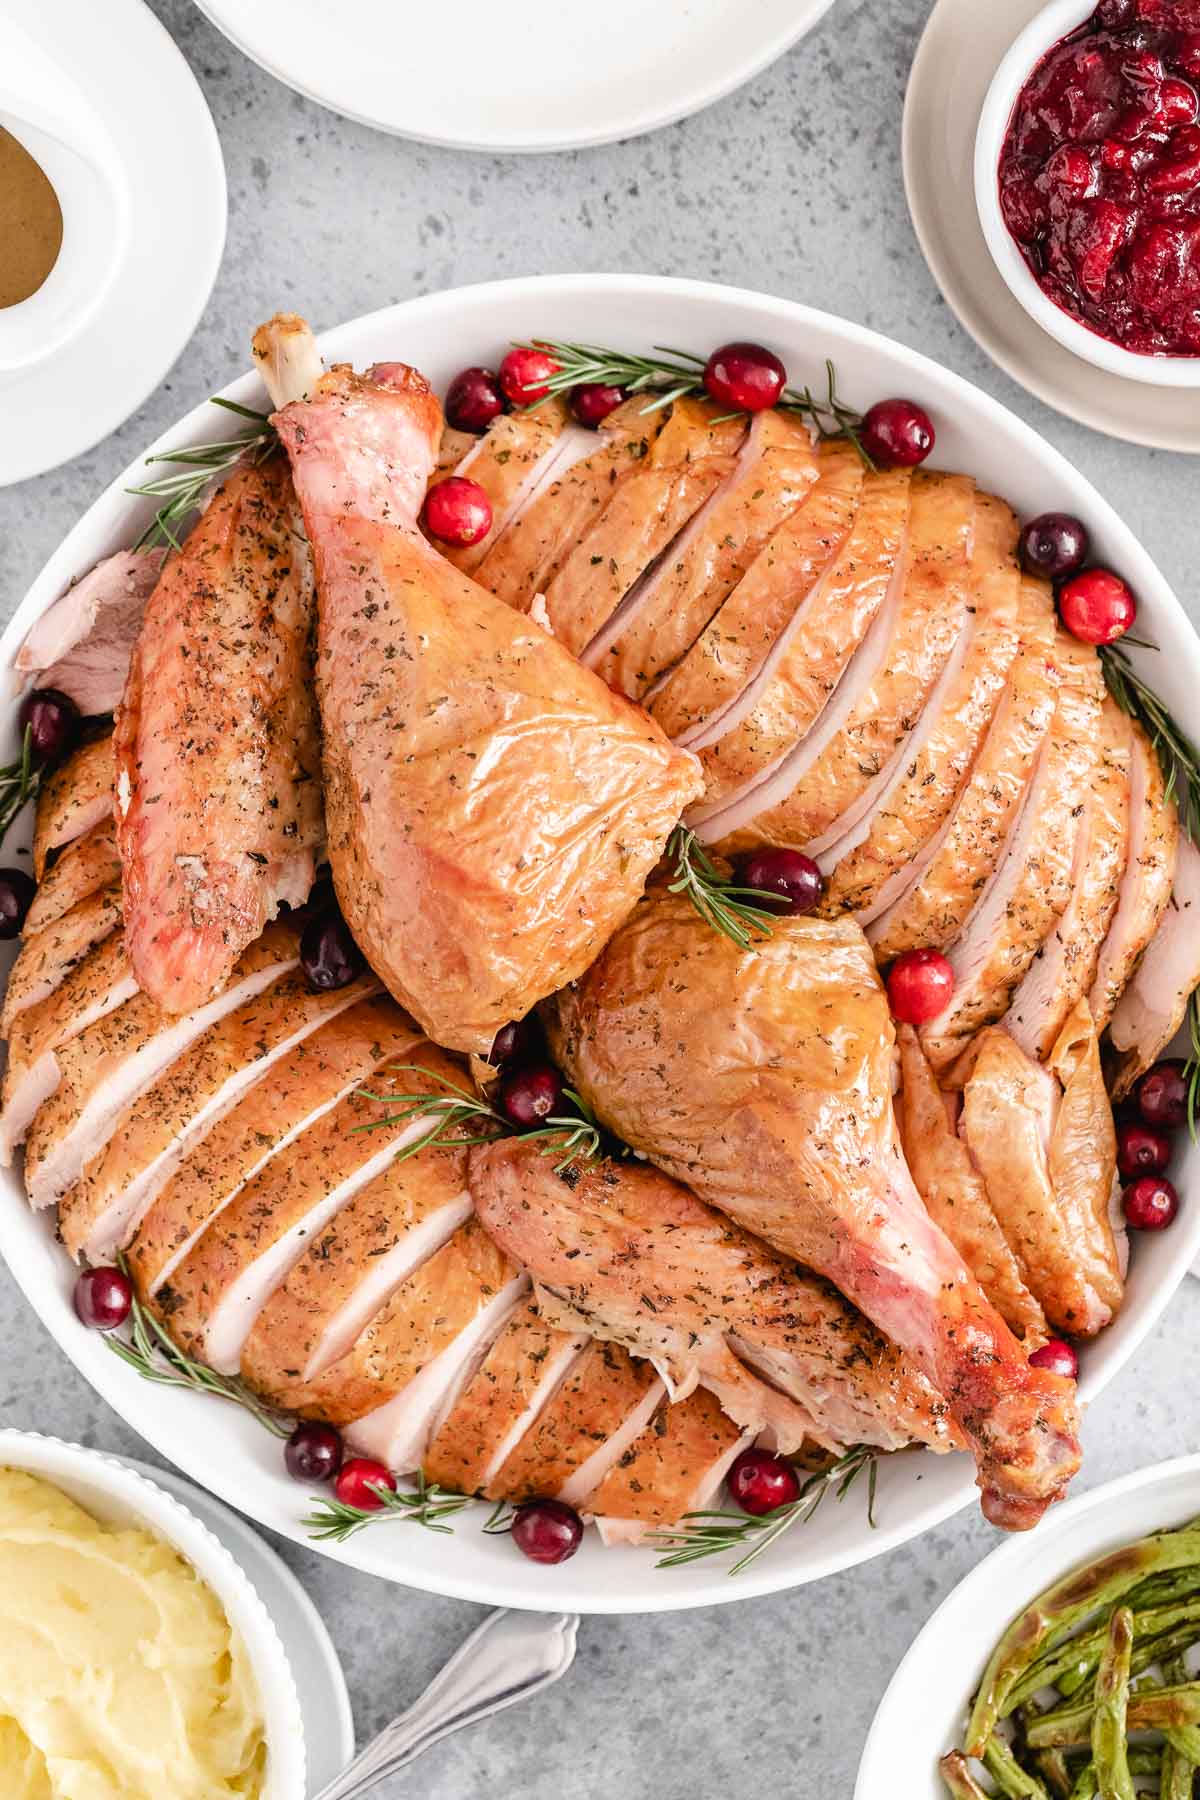 A sliced whole turkey on a white serving platter garnished with cranberries and rosemary